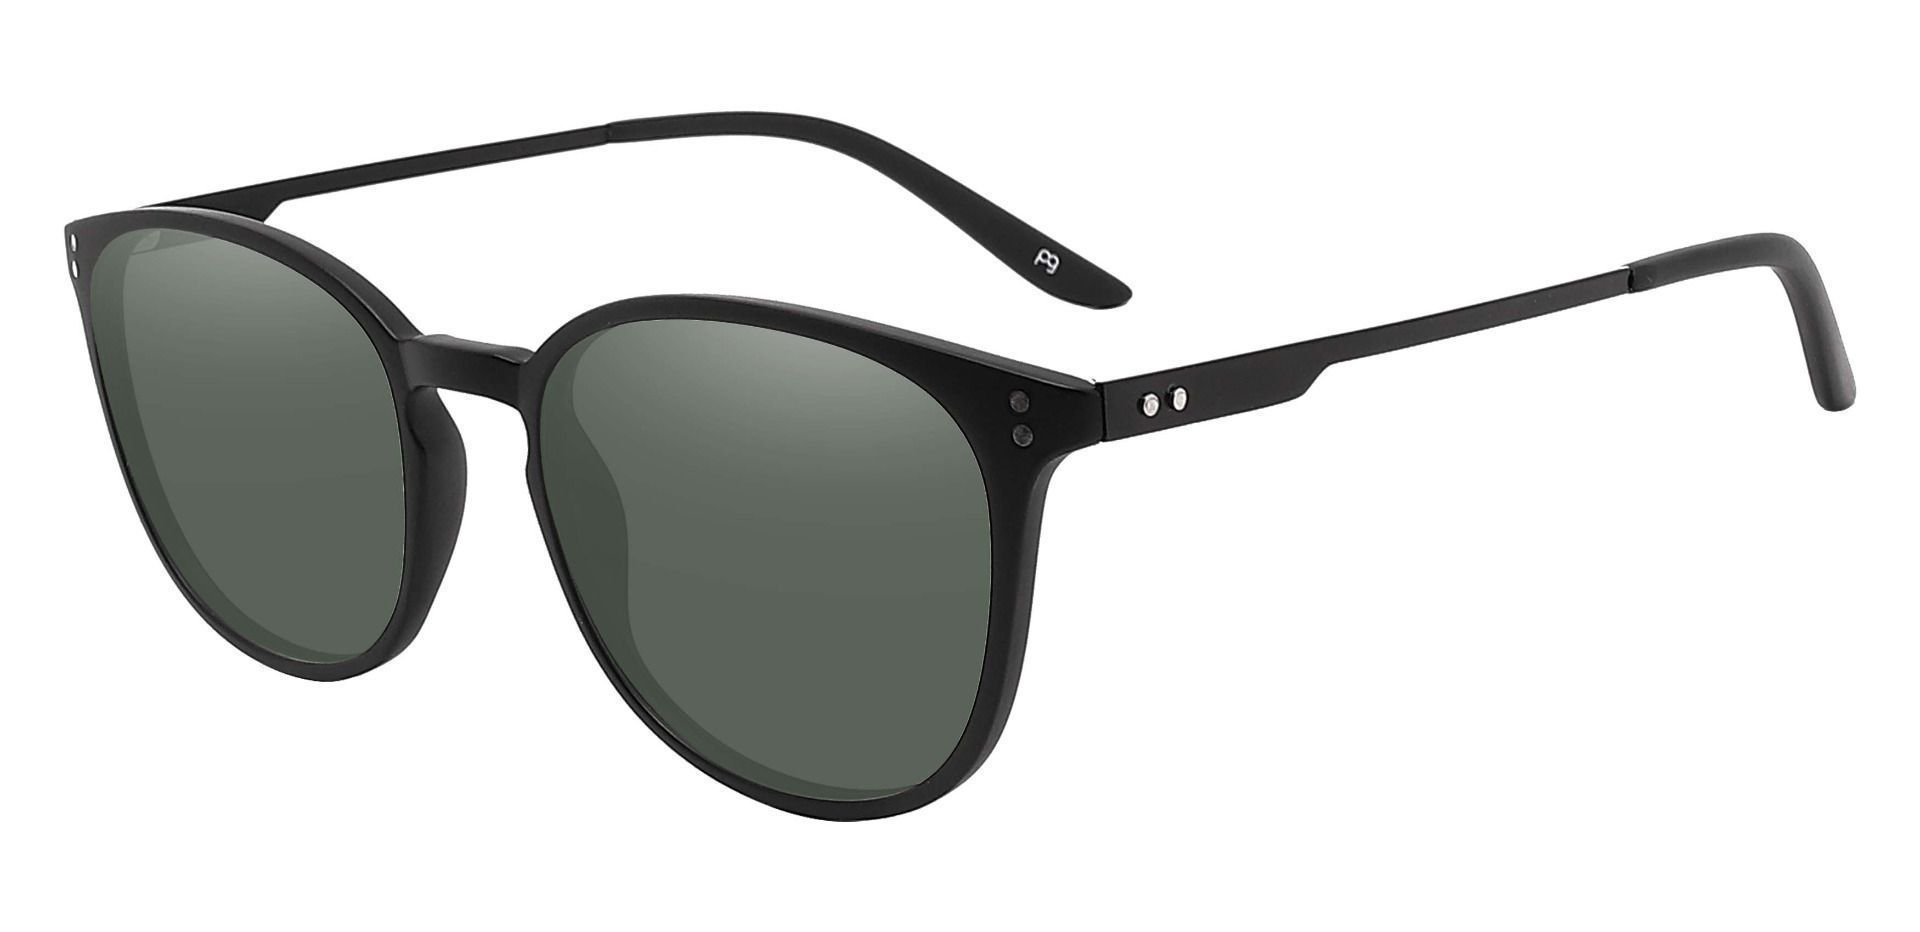 Wales Oval Reading Sunglasses - Black Frame With Green Lenses